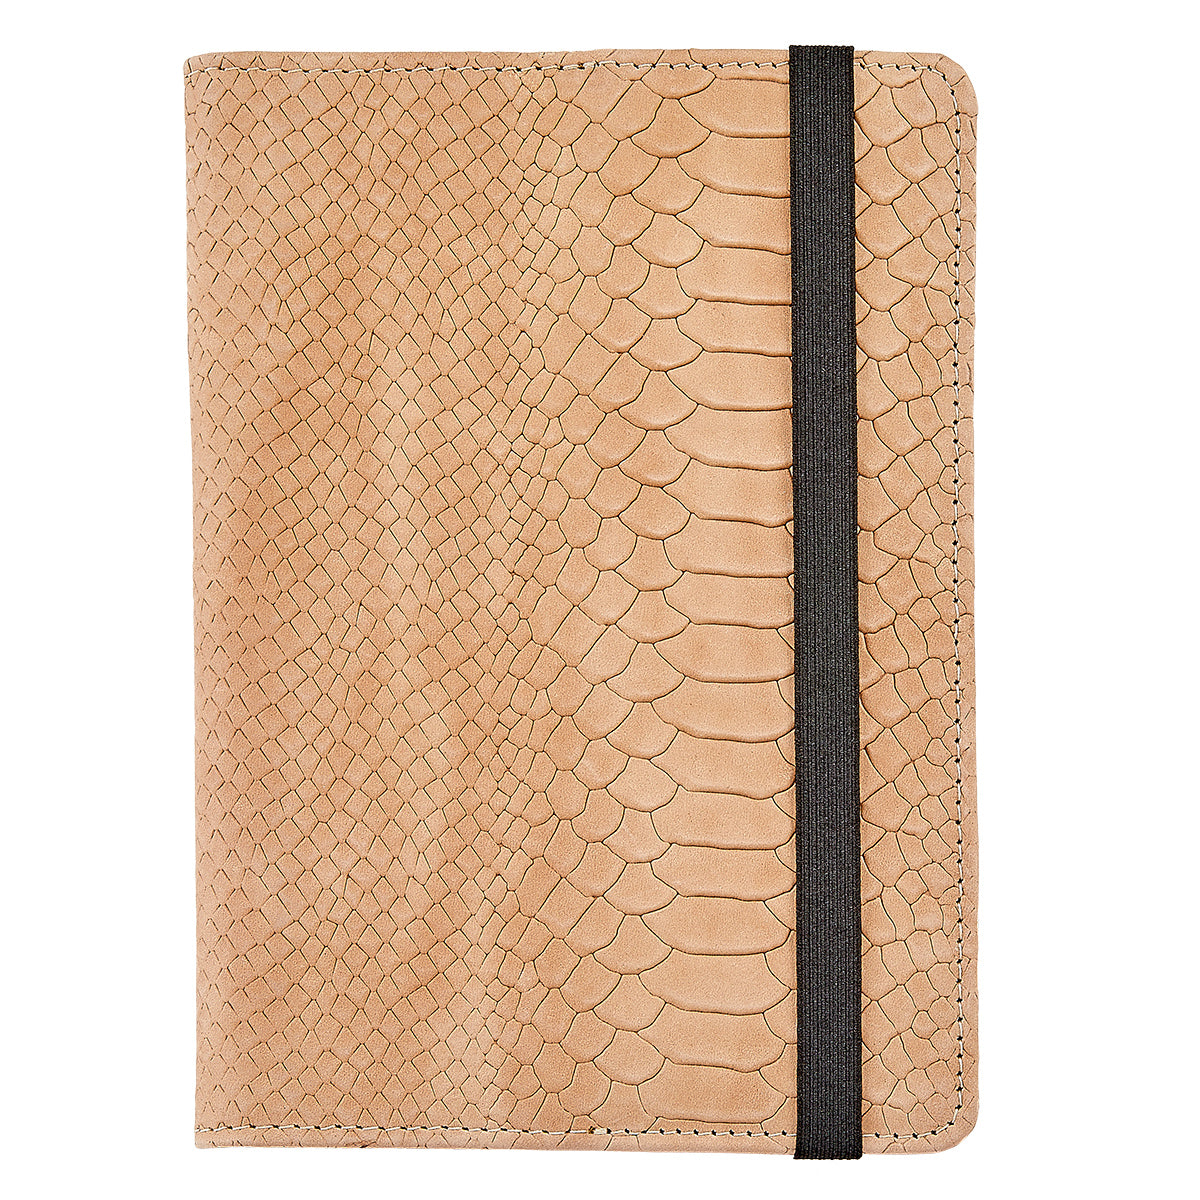 Graphic Image EBook Reader Case Sand Embossed Python Leather